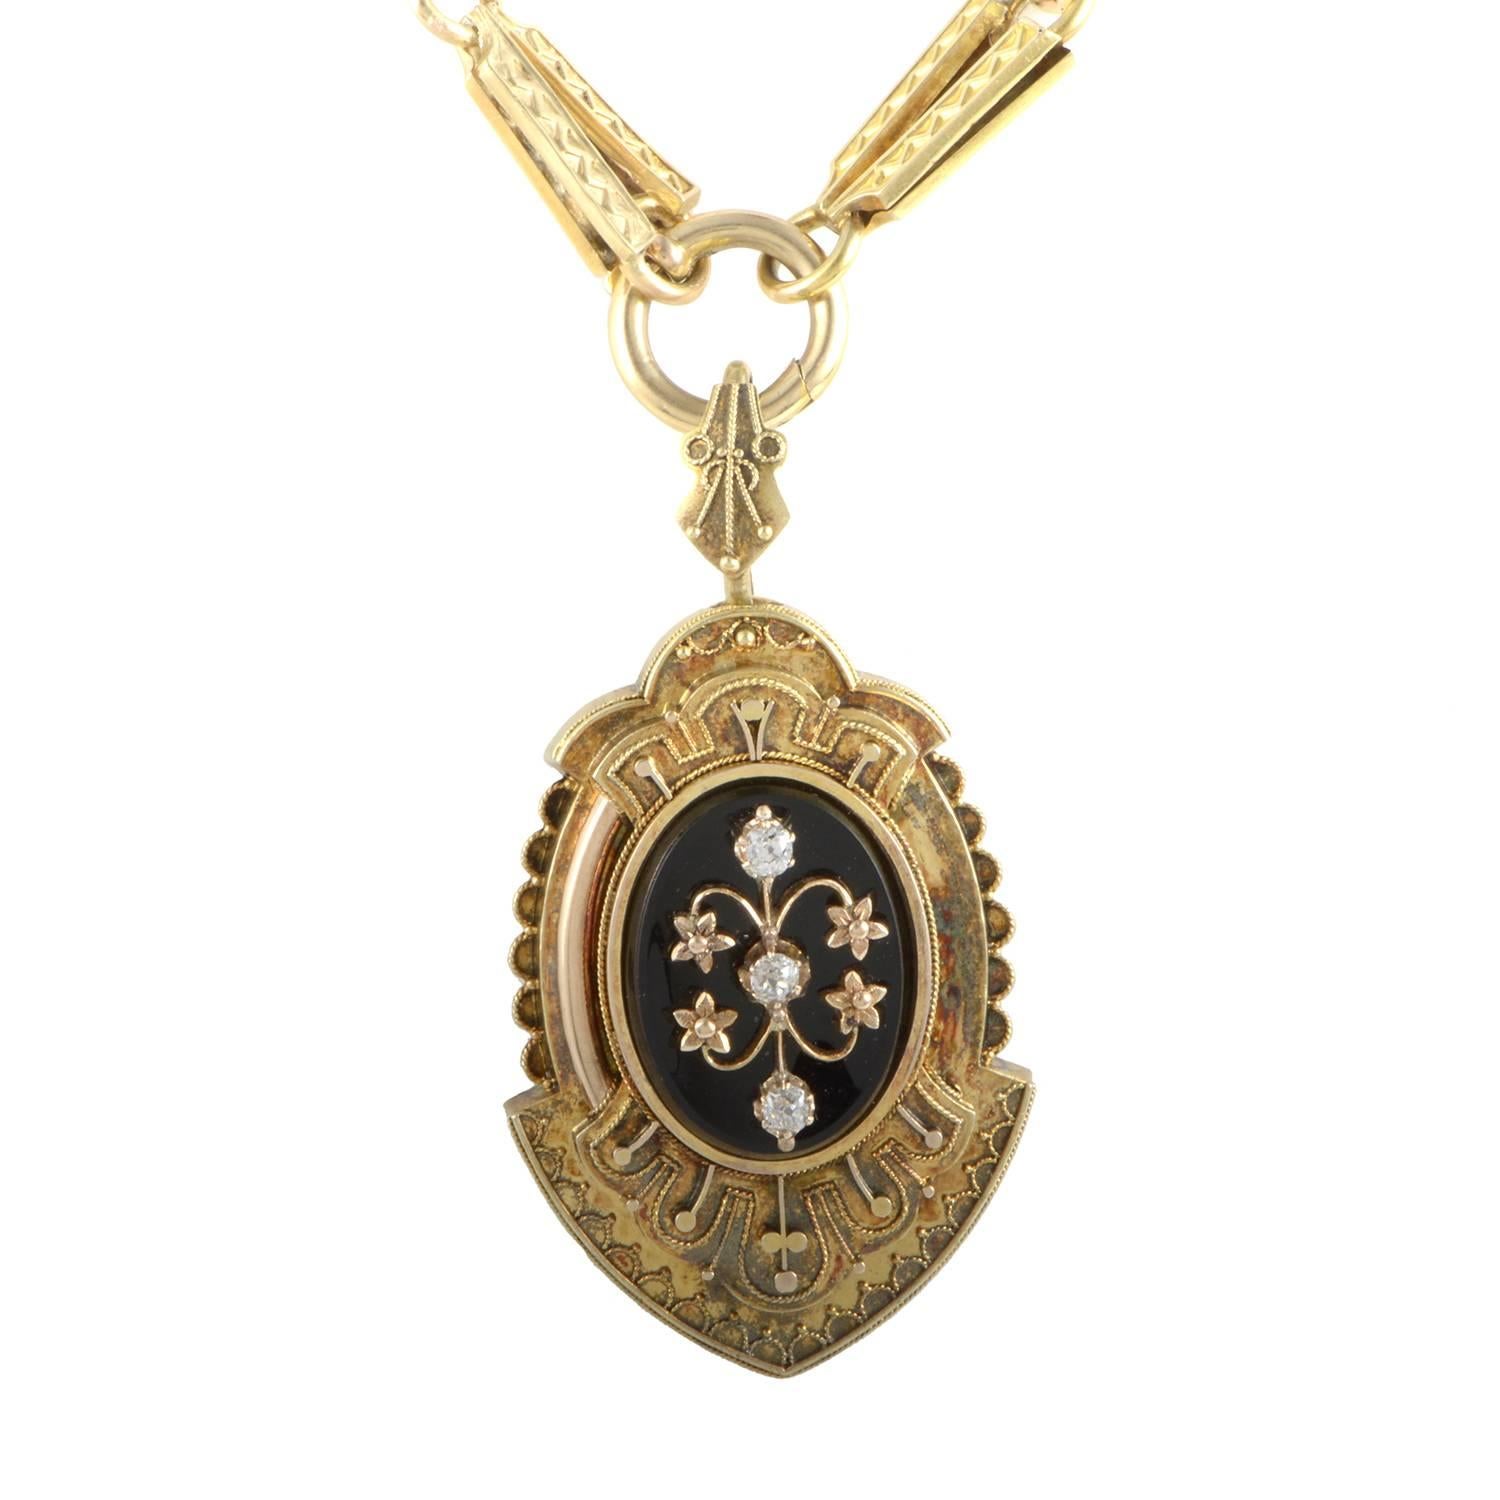 With lavish artistic decoration and irresistible Victorian spirit, this extraordinary locket is made of prestigious 18K yellow gold contrasted by an eye-catching onyx and adorned with sparkling diamonds for an astonishing sight.
Pendant Dimensions: